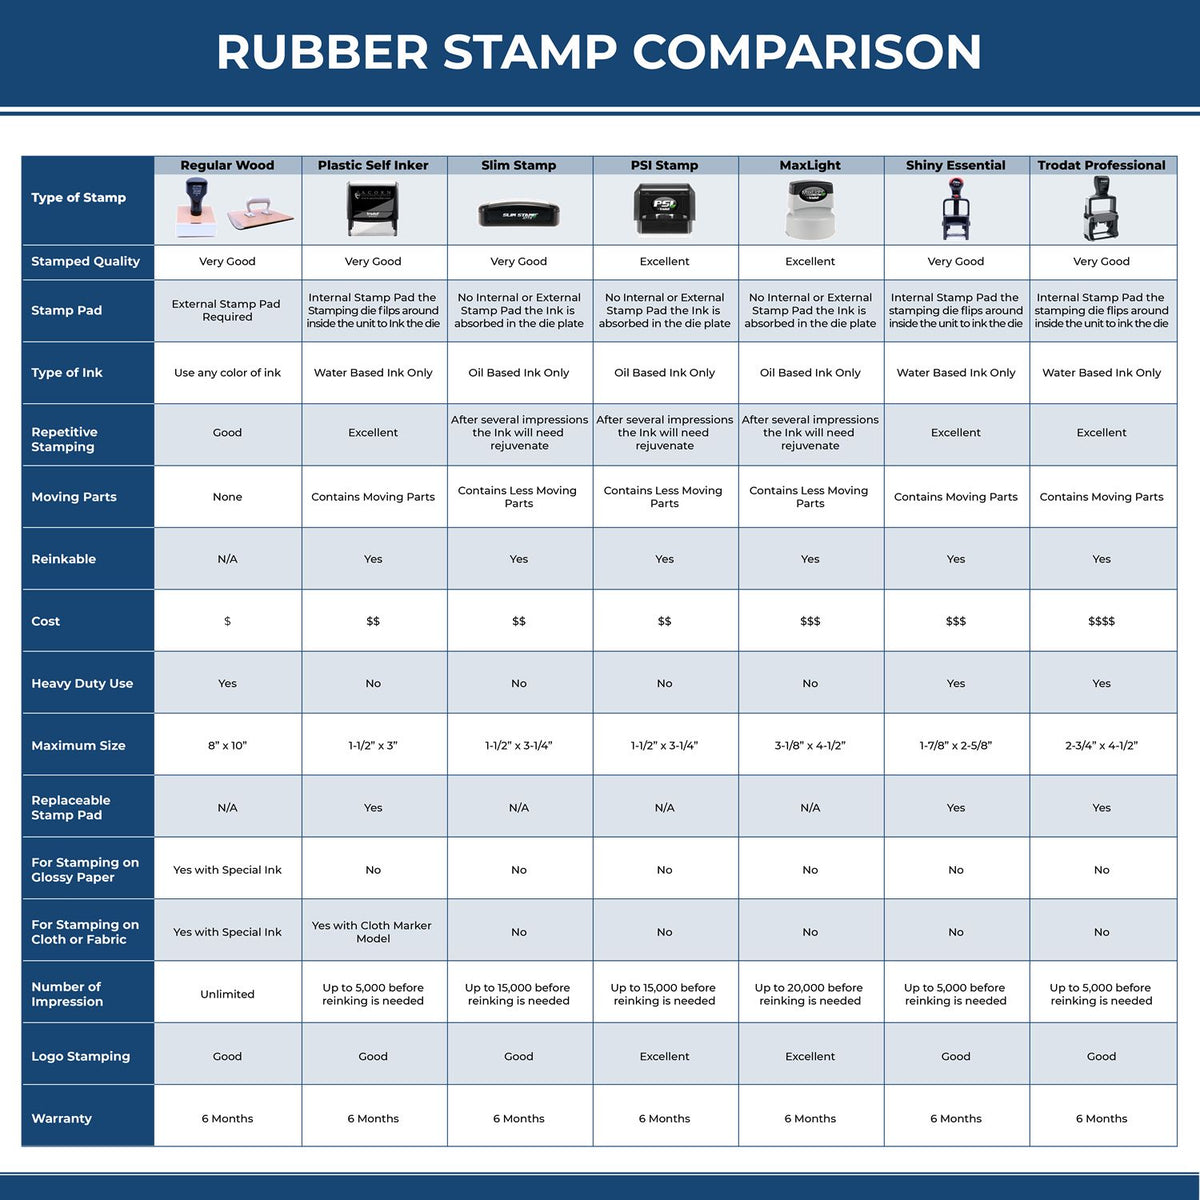 A comparison chart for the different types of mount models available for the Super Slim New Jersey Notary Public Stamp.